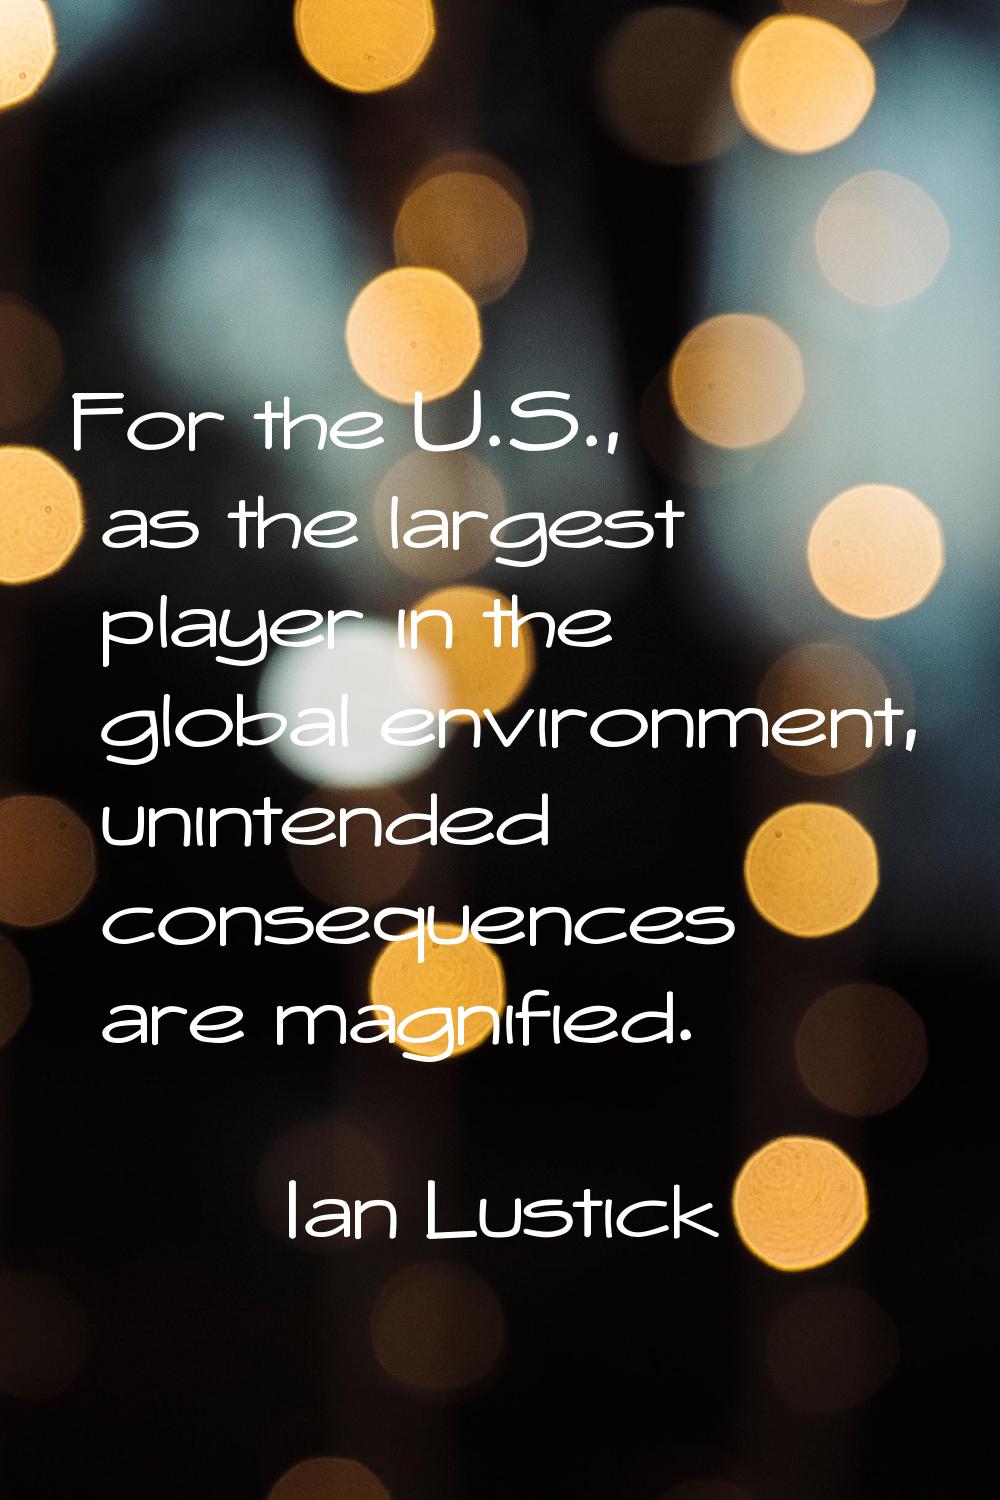 For the U.S., as the largest player in the global environment, unintended consequences are magnifie